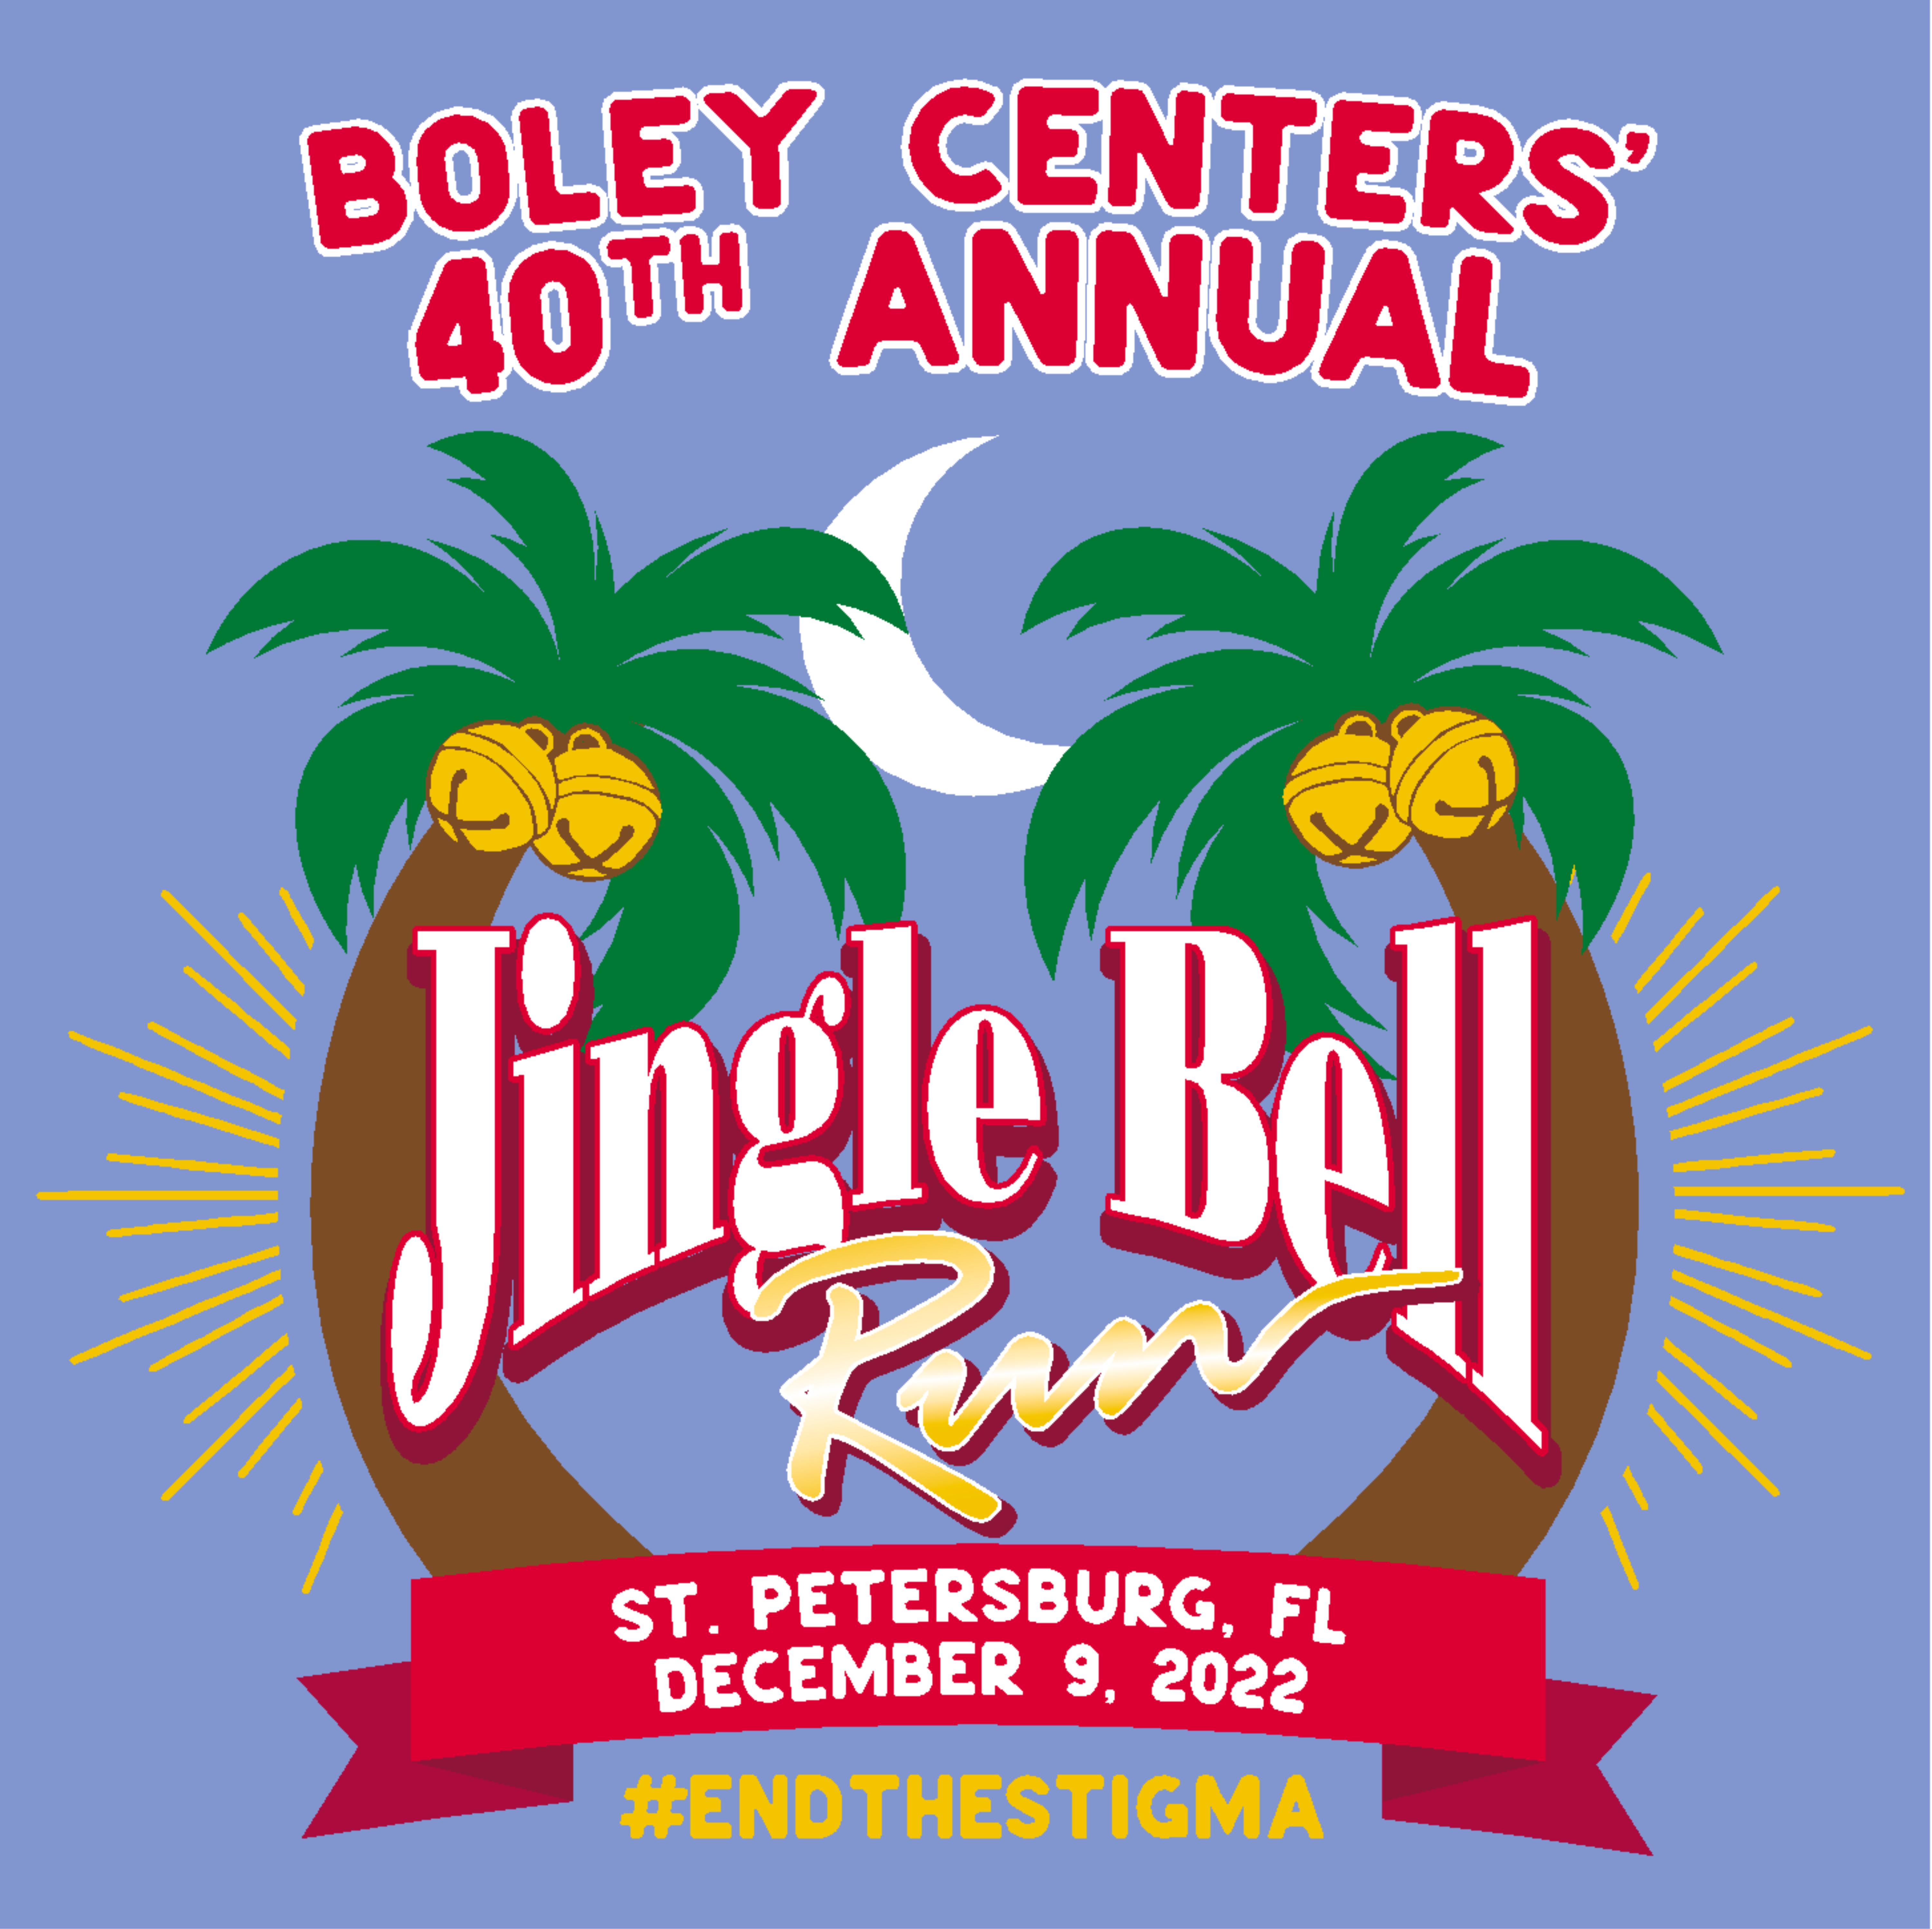 Join us for Boley Centers’ 40th Annual Jingle Bell Run!